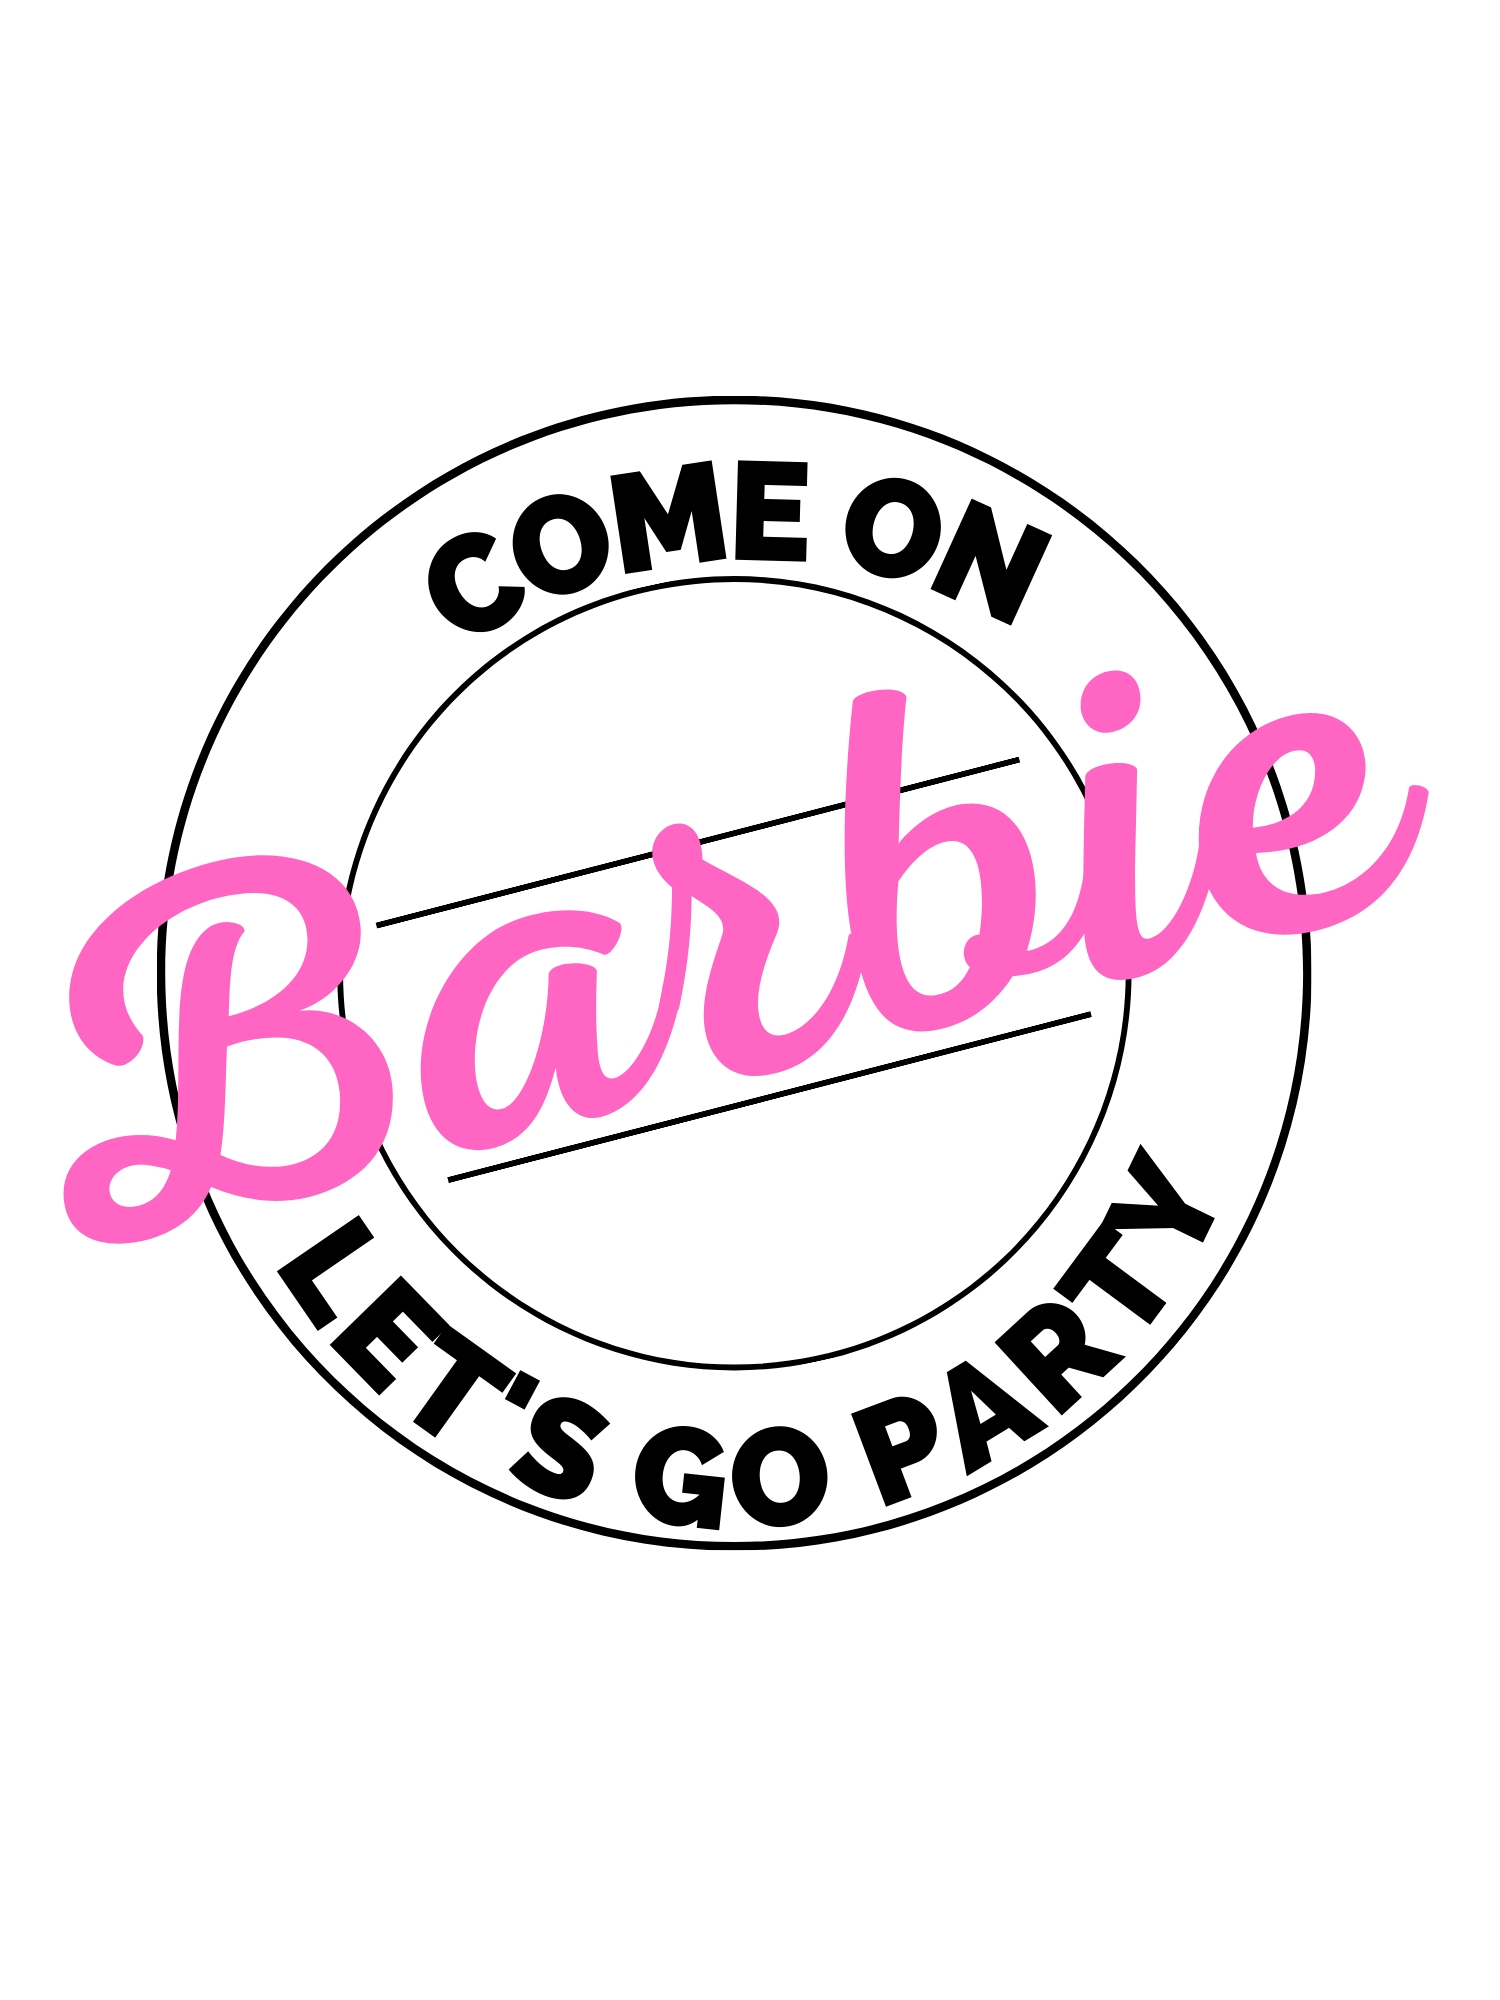 Come on Barbie Collection